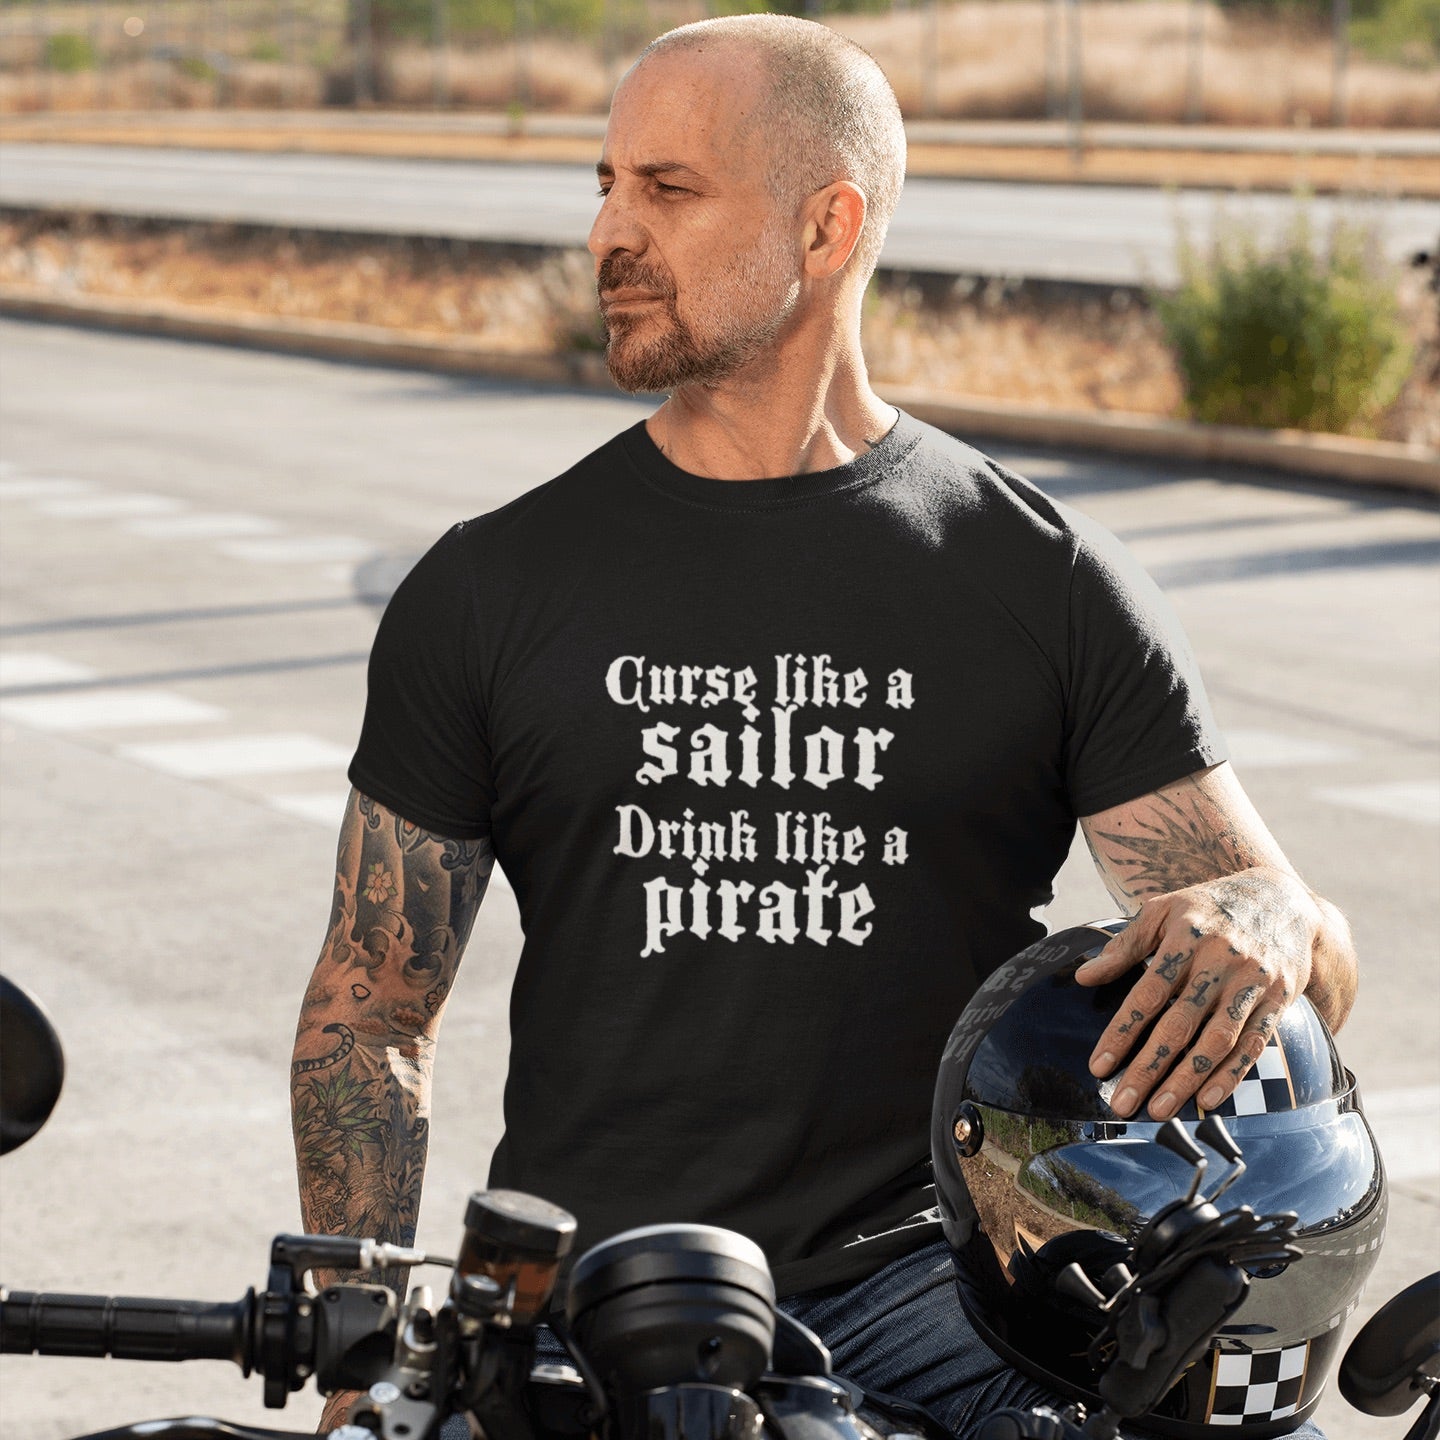 Man with shaved head sits on motorcycle with hemet under his hand. He has tattoos and wears a black shirt with the words curse like a sailor drink like a pirate in white letters.